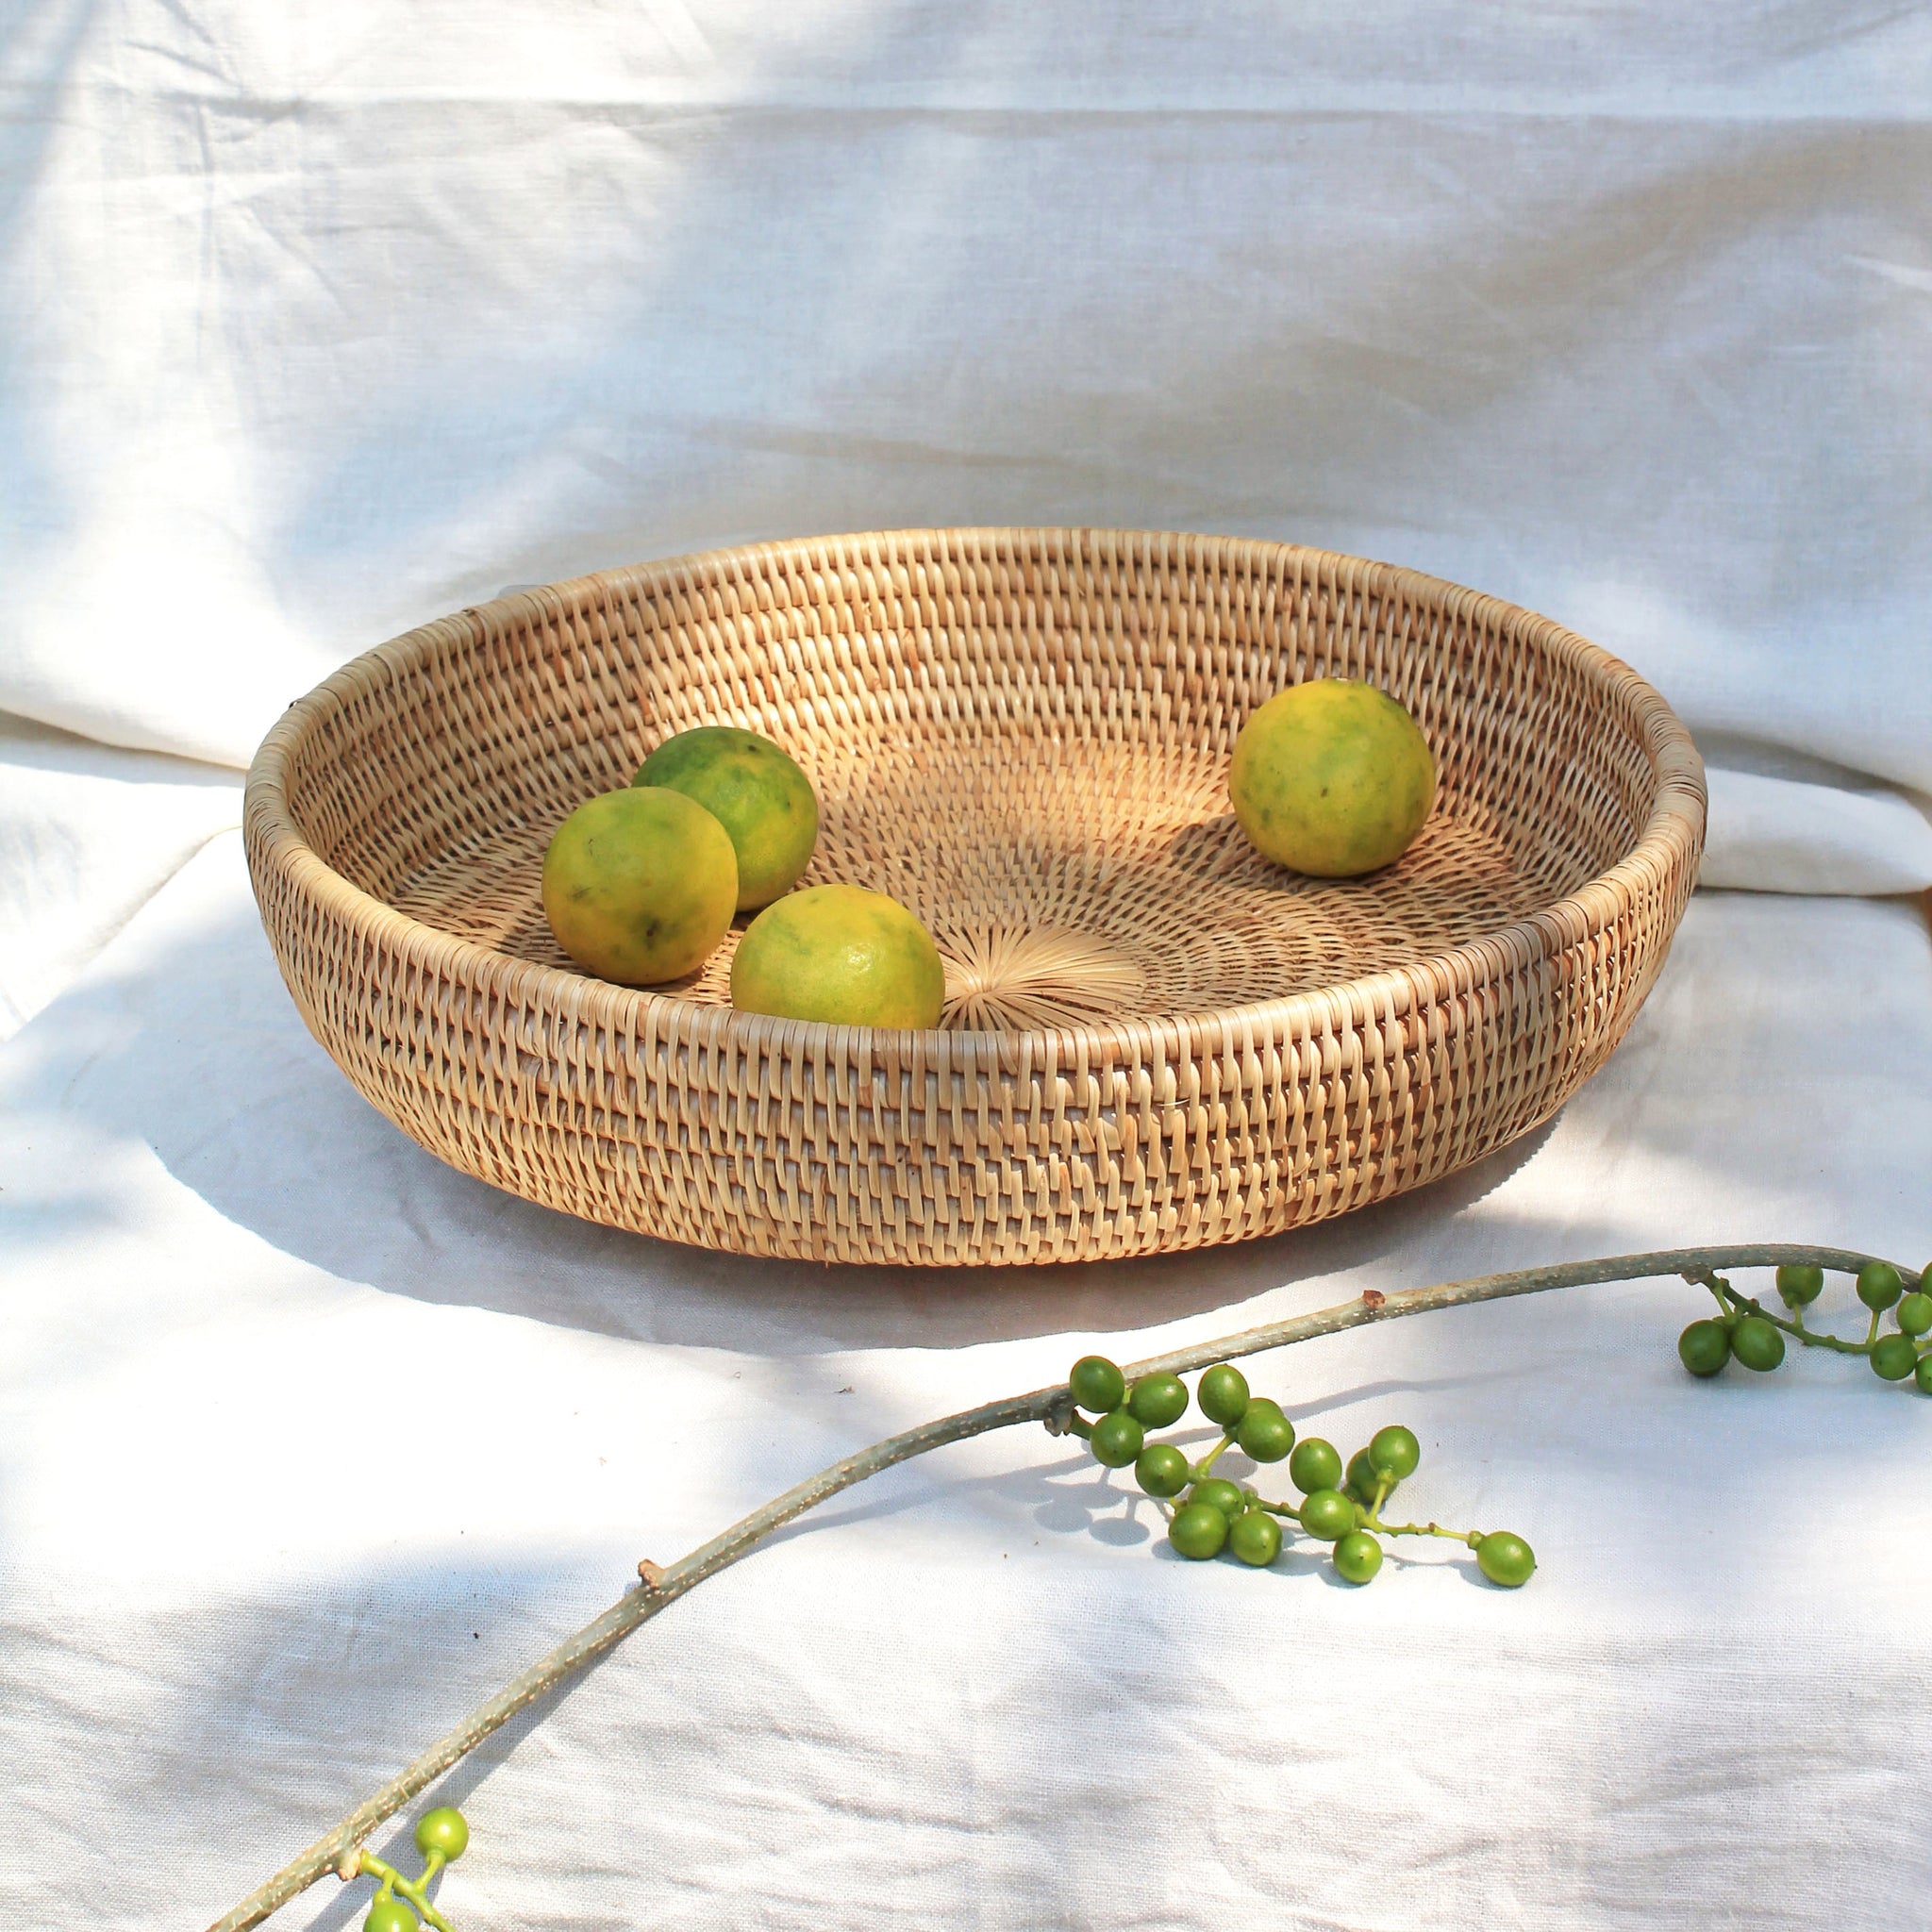 This platter makes a beautiful eye catcher in your interior.  Use this handwoven rattan basket for fruit, decoration on the wall or in the hallway for your keys, phone and other small belongings.